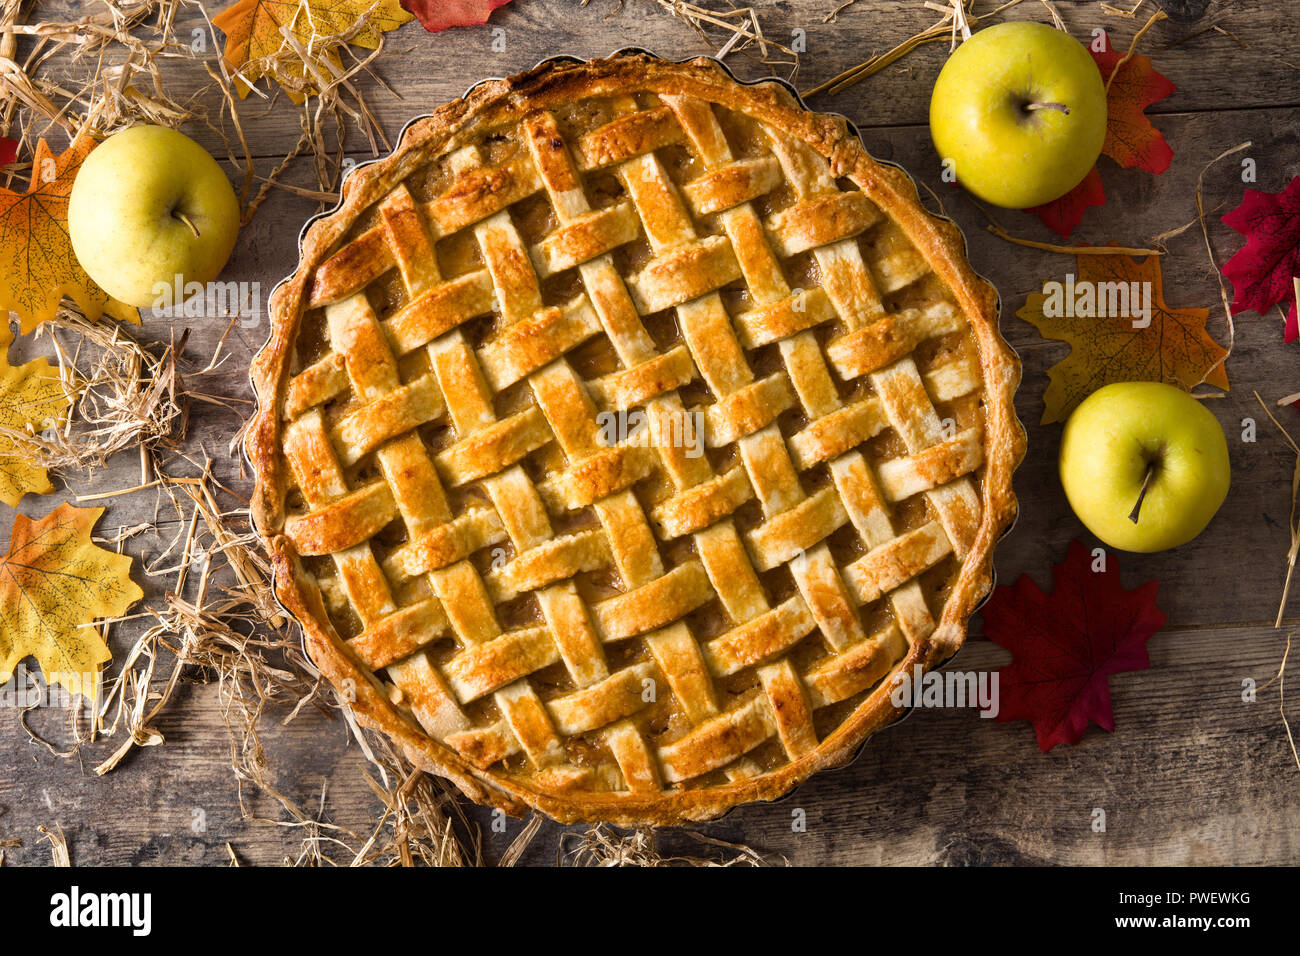 Homemade apple pie on wooden table. Top view Stock Photo